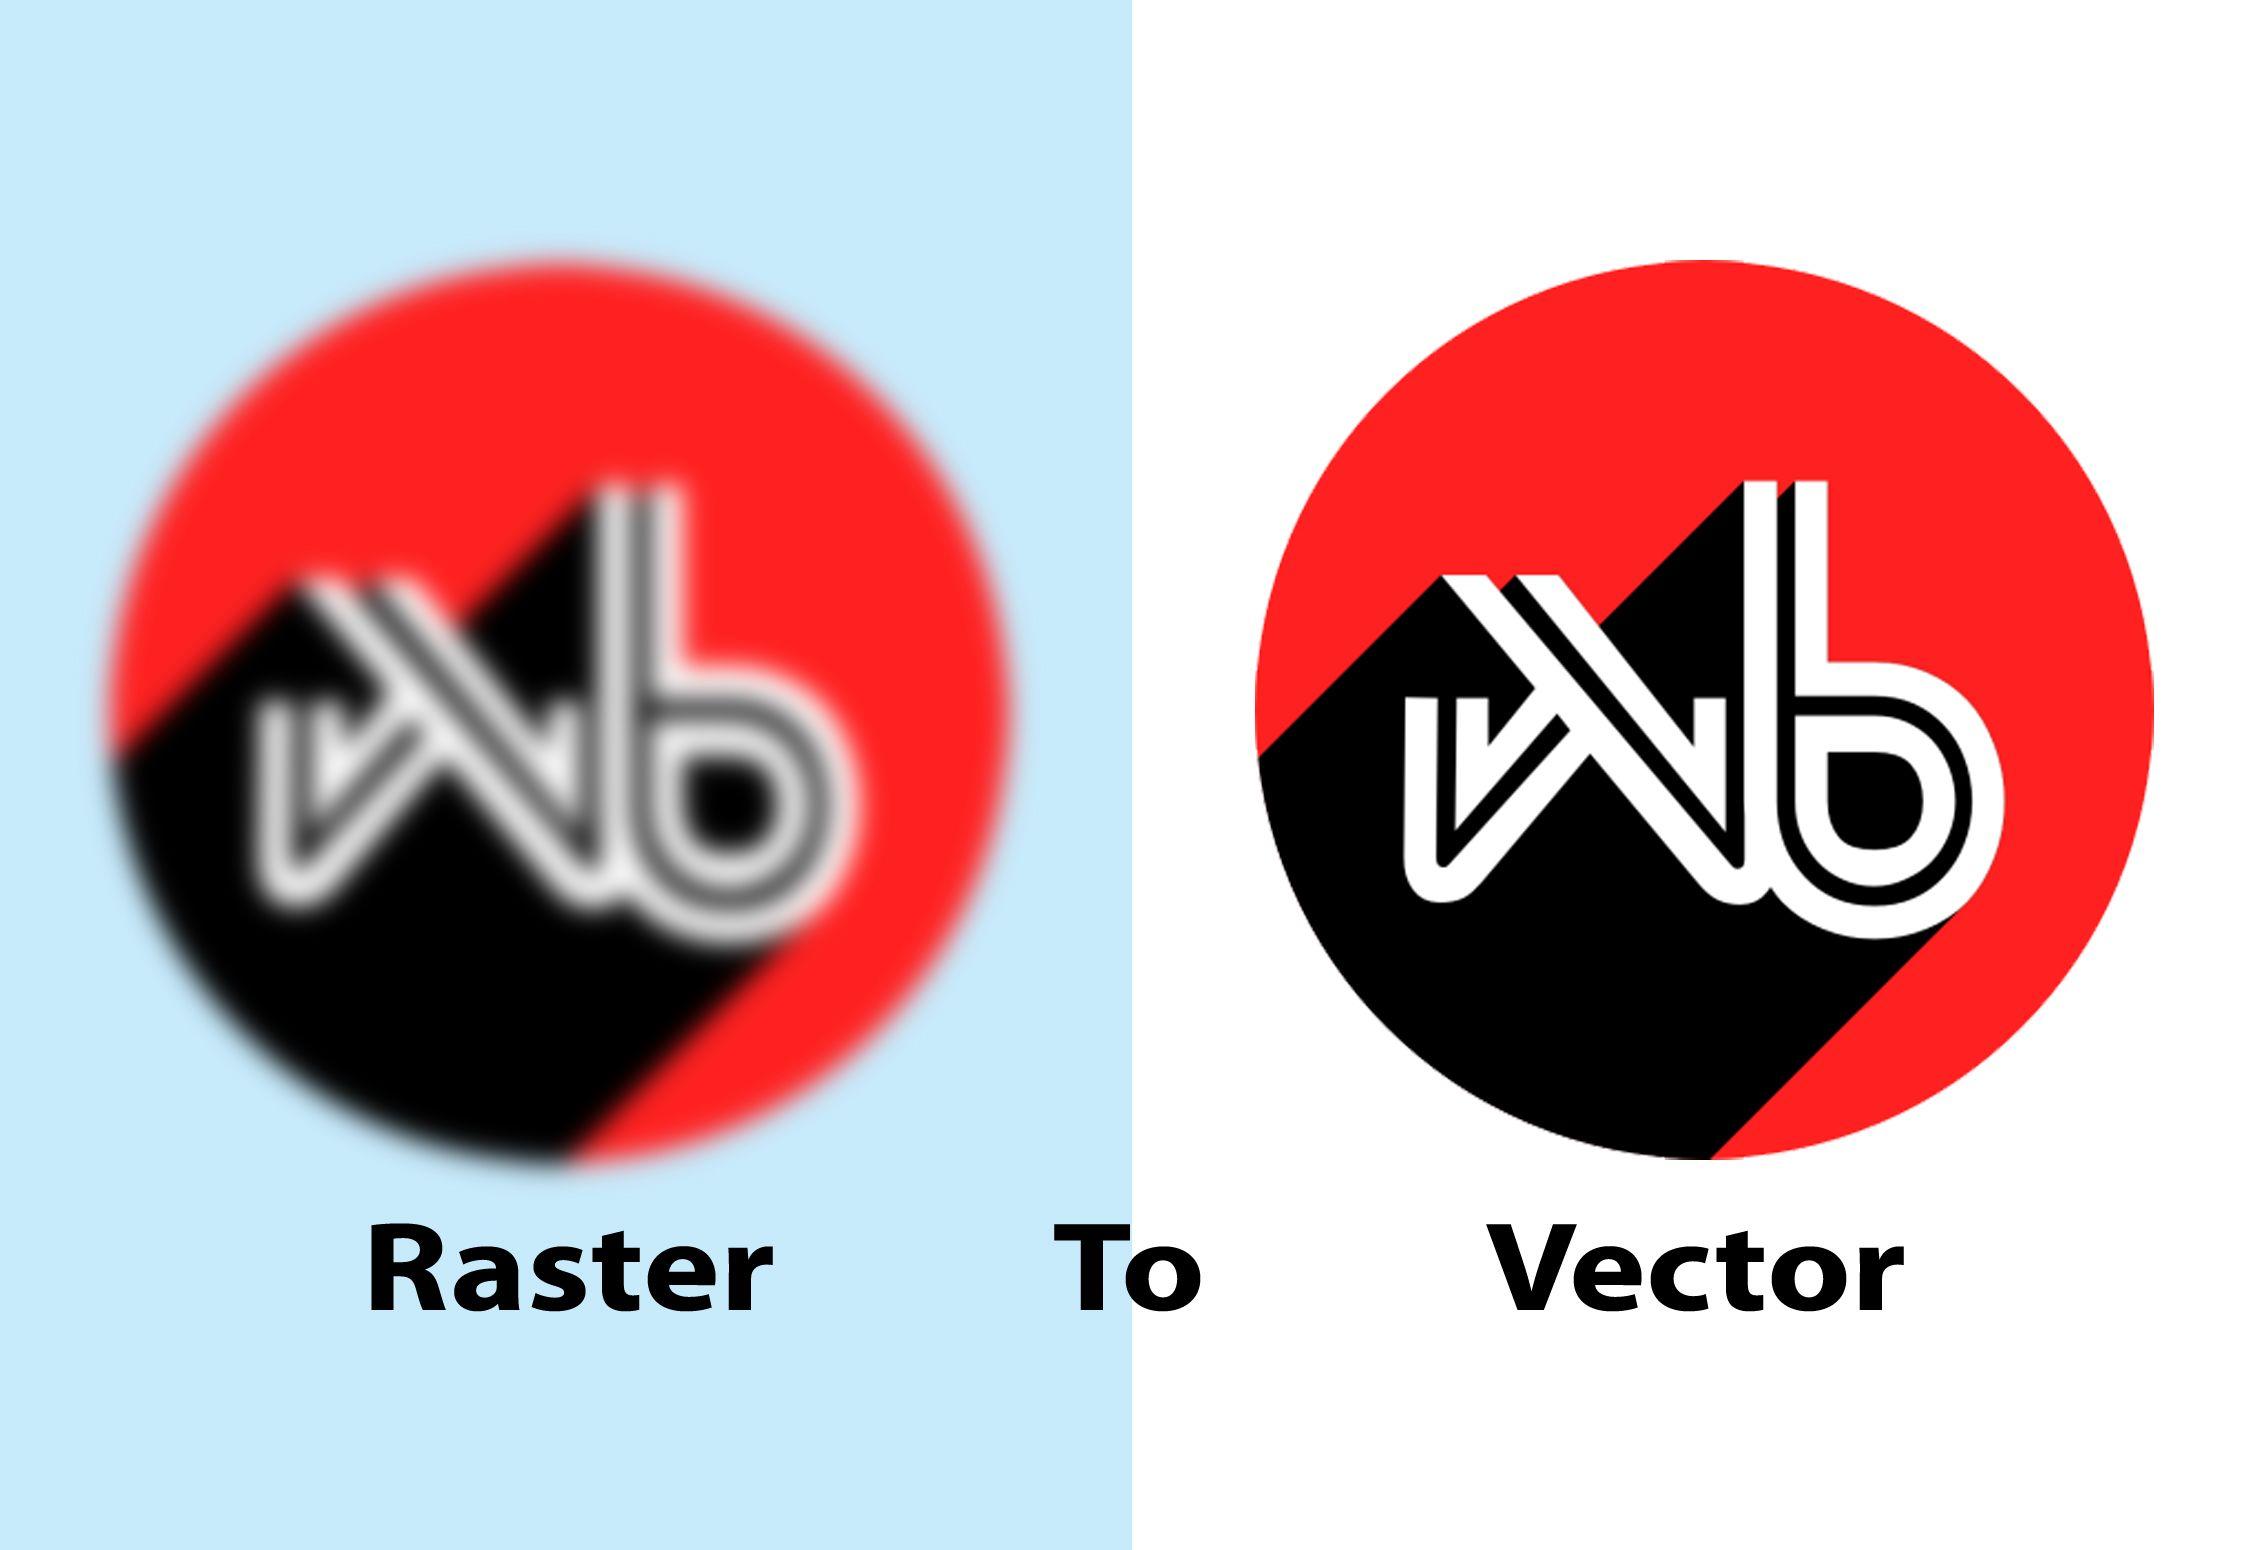 Blurry Logo - I WILL DO VECTOR TRACE OR IMAGE TO VECTOR ANY LOW RESOLUTION / FUZZY ...